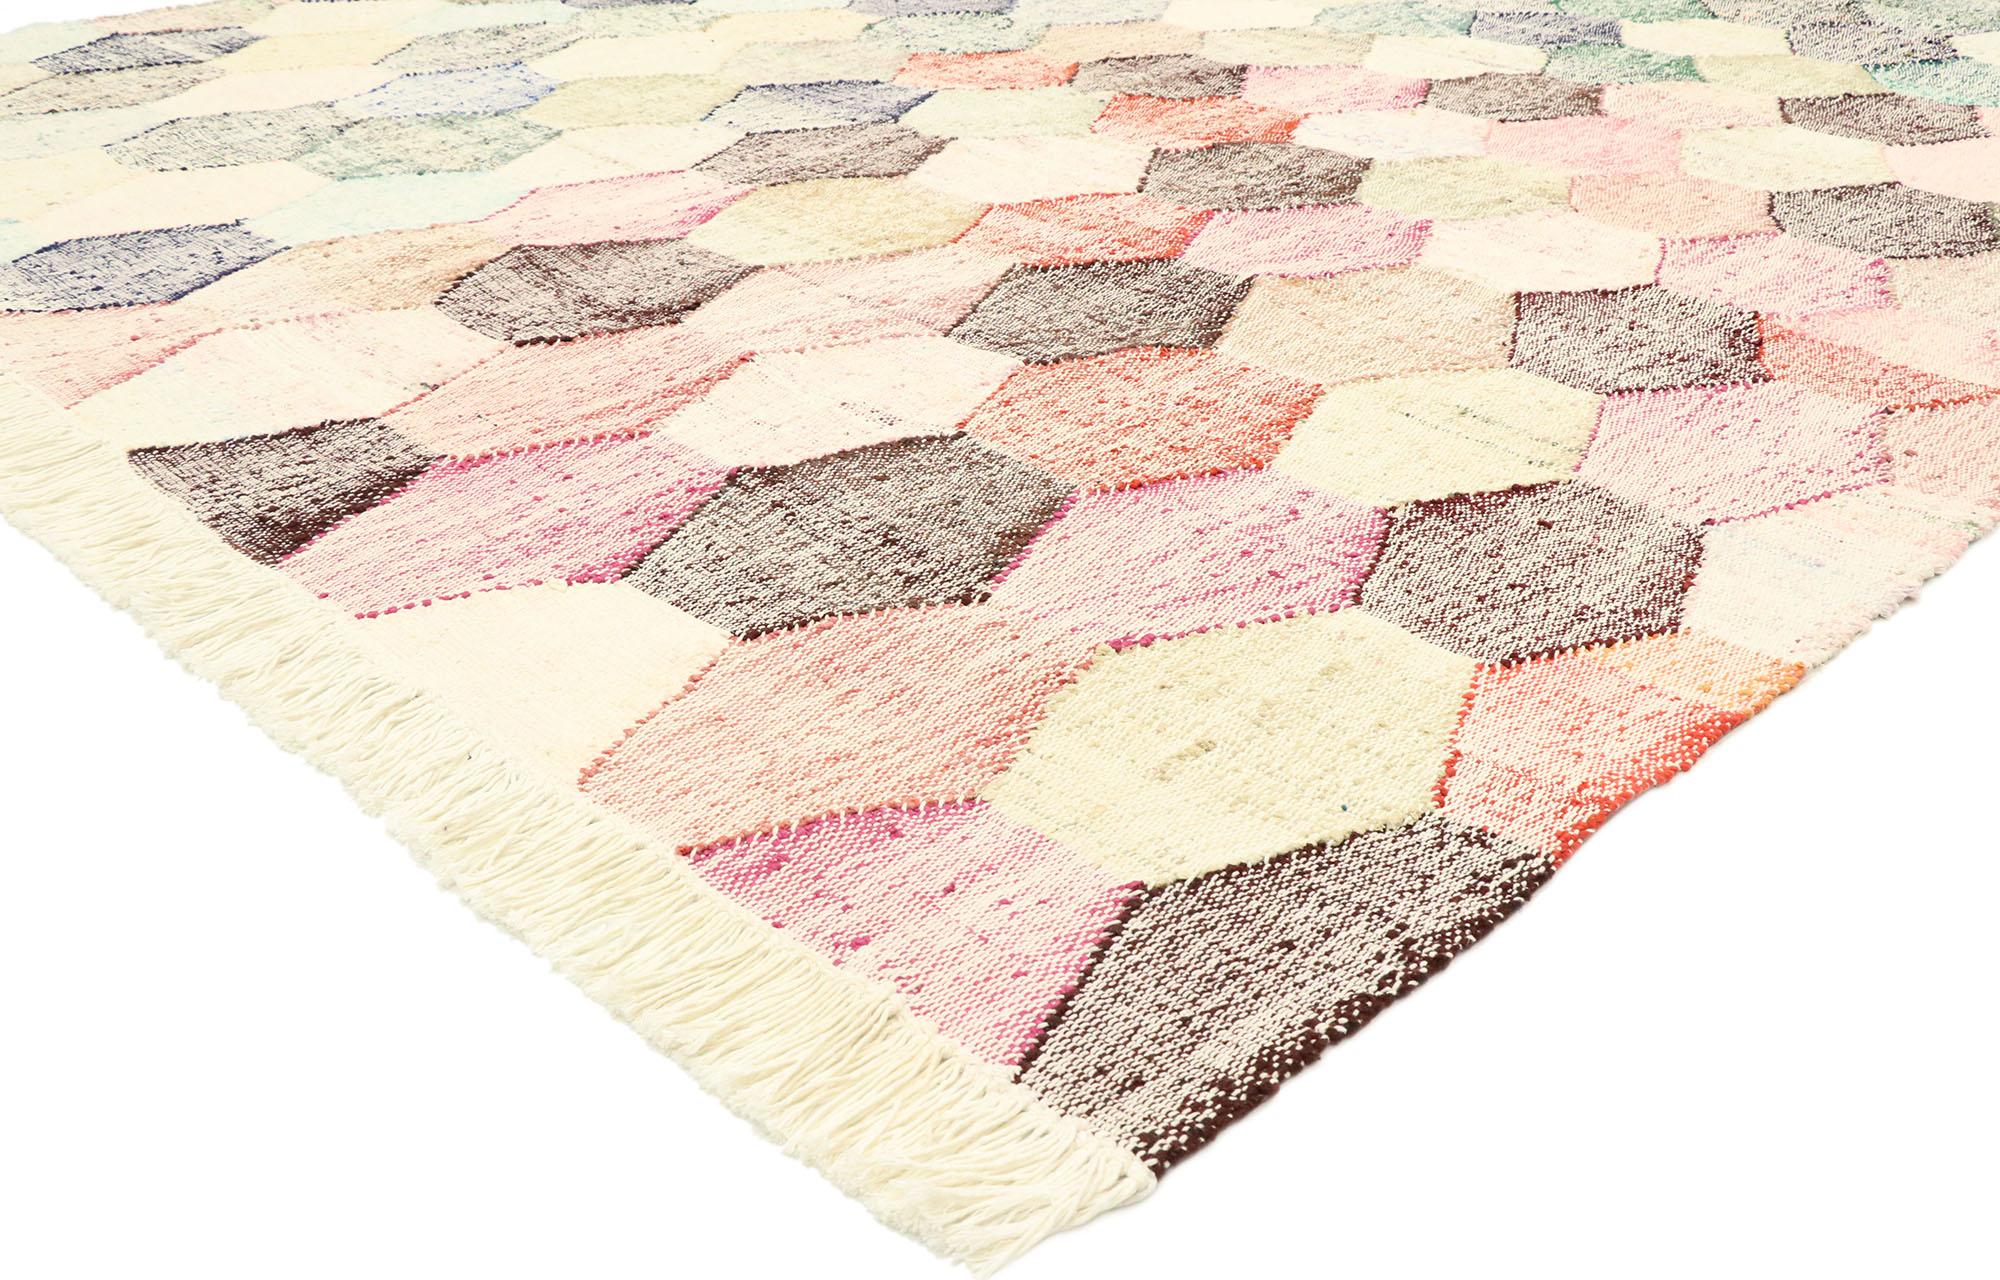 53022 new handwoven Turkish Kilim rug with hexagonal pattern. Featuring well-balanced symmetry with a simple design aesthetic, this handwoven Turkish Kilim rug adds texture and subtle graphic appeal forming a warm, relaxed space. The abrashed field